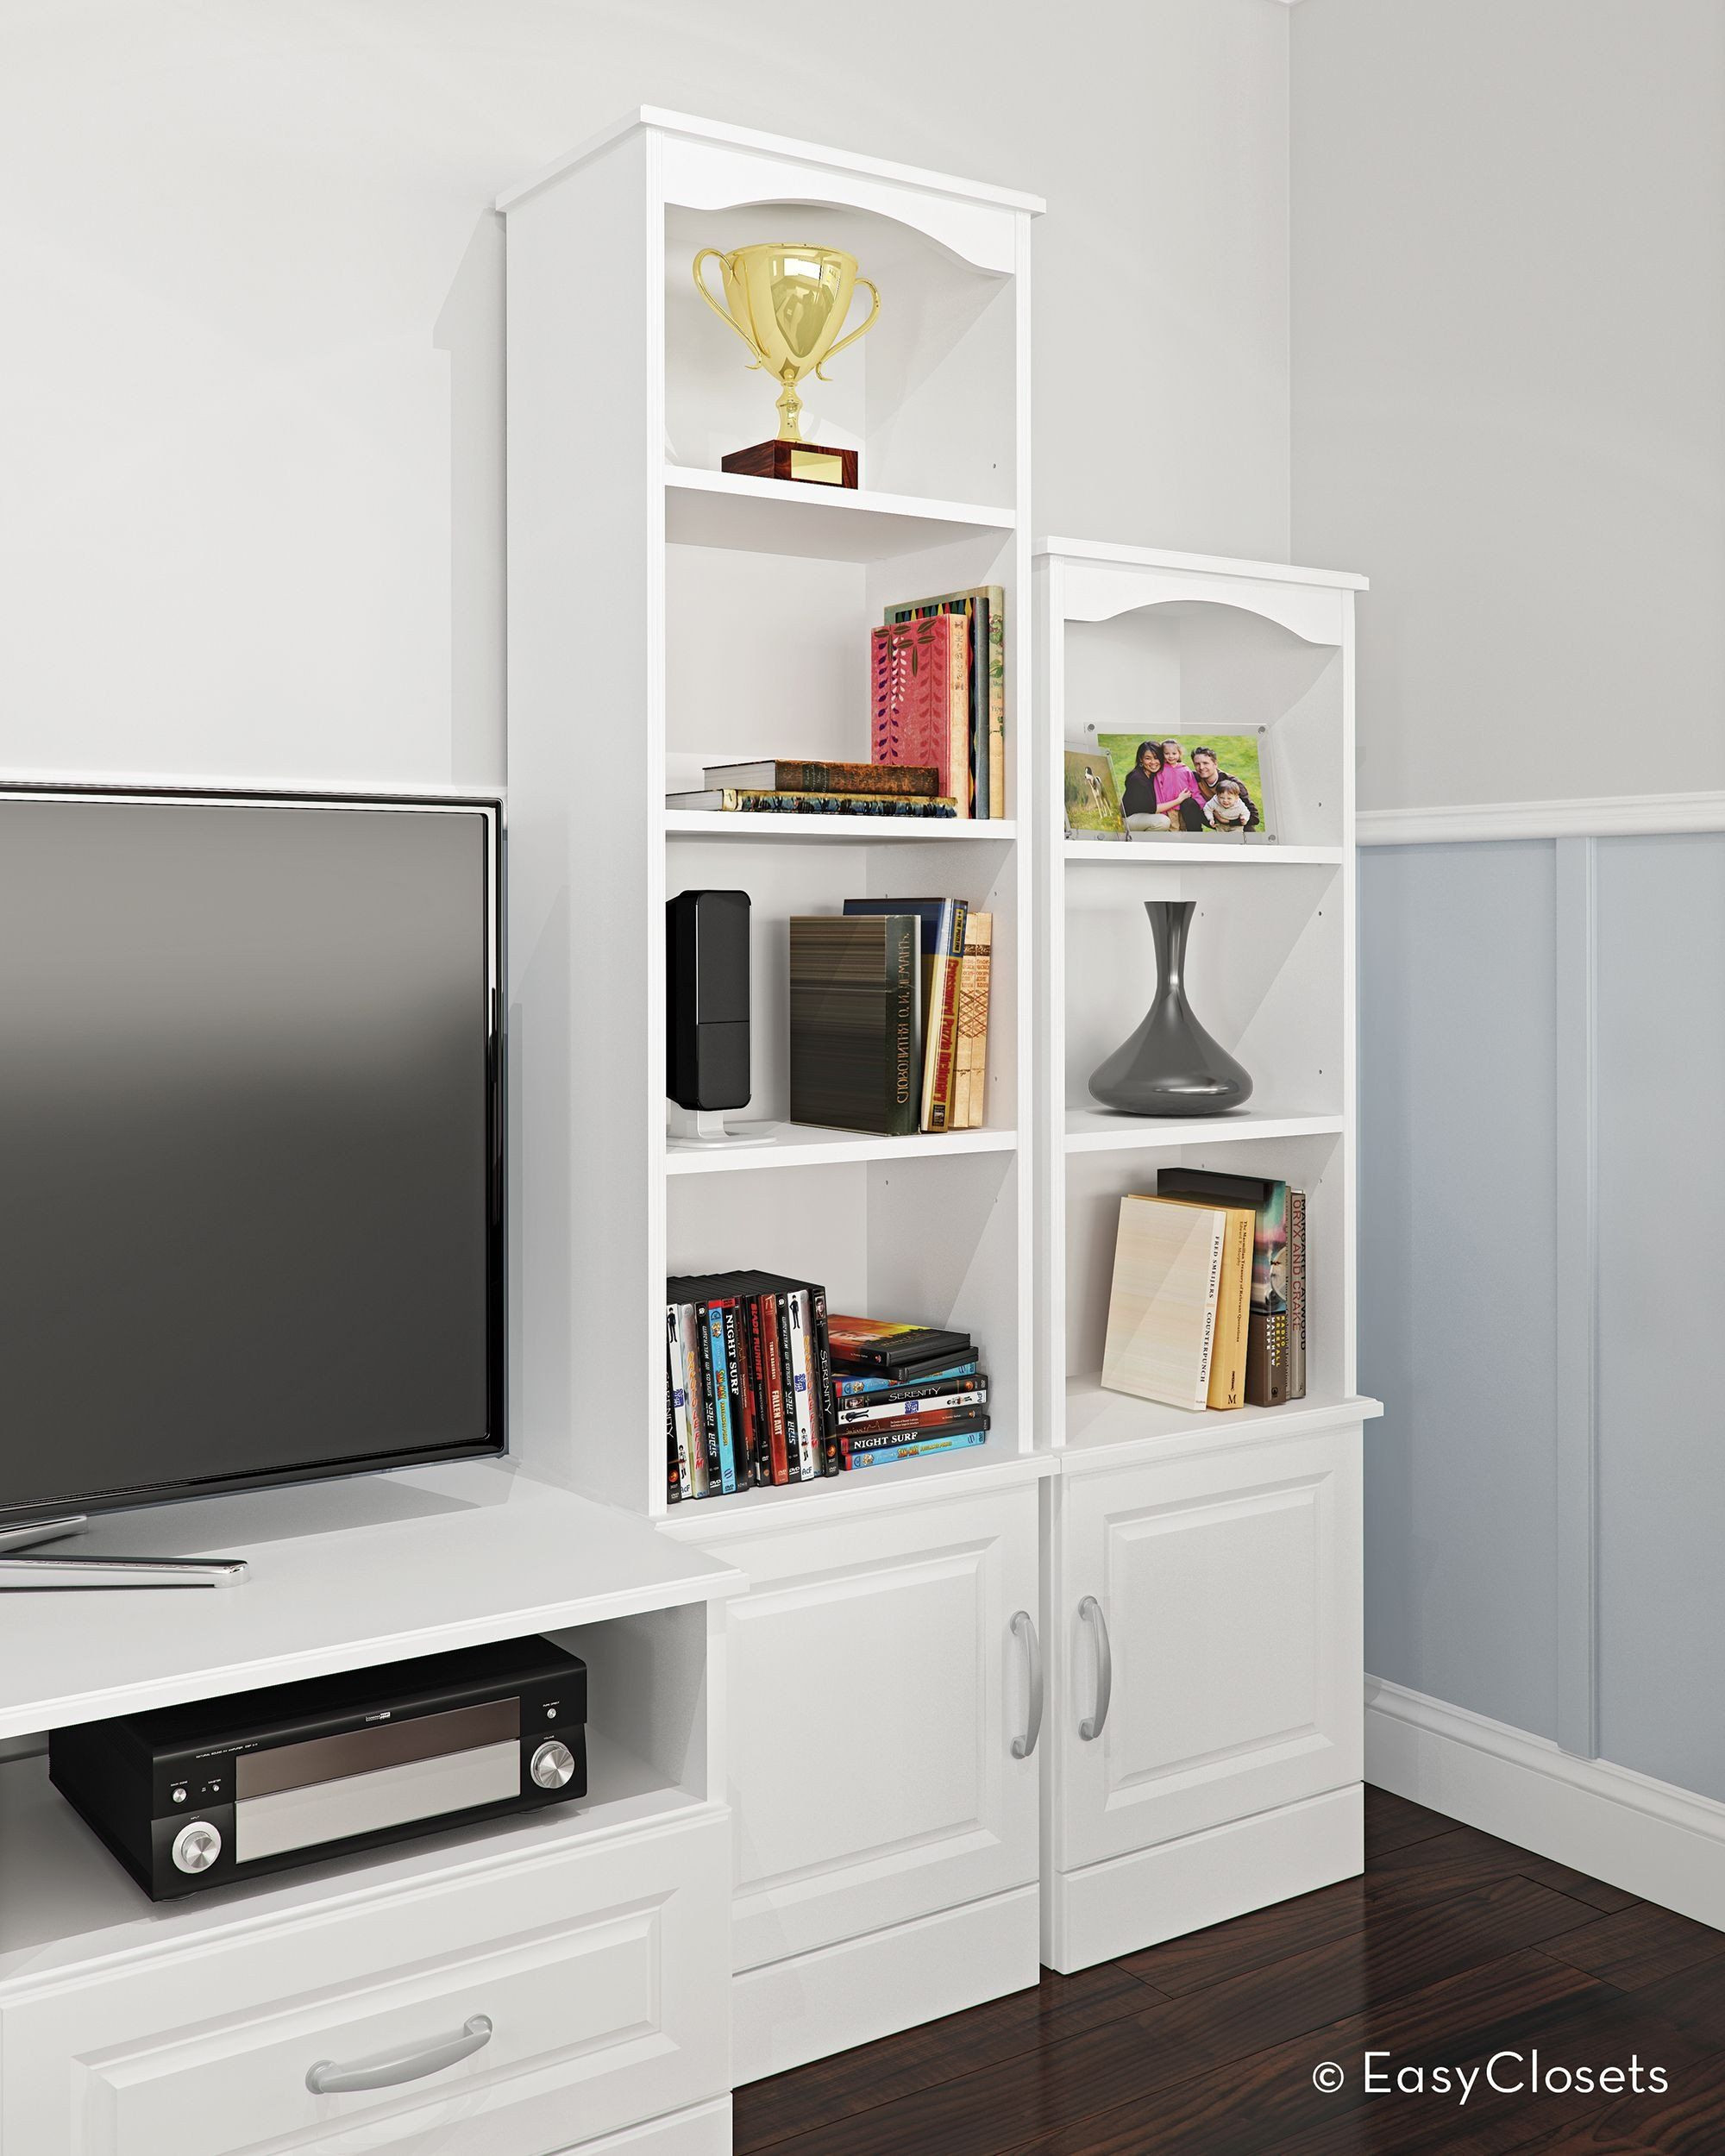 Tv Stands For Kids Room
 Tv Stand for Kids Room Inspirational Tv Stand and